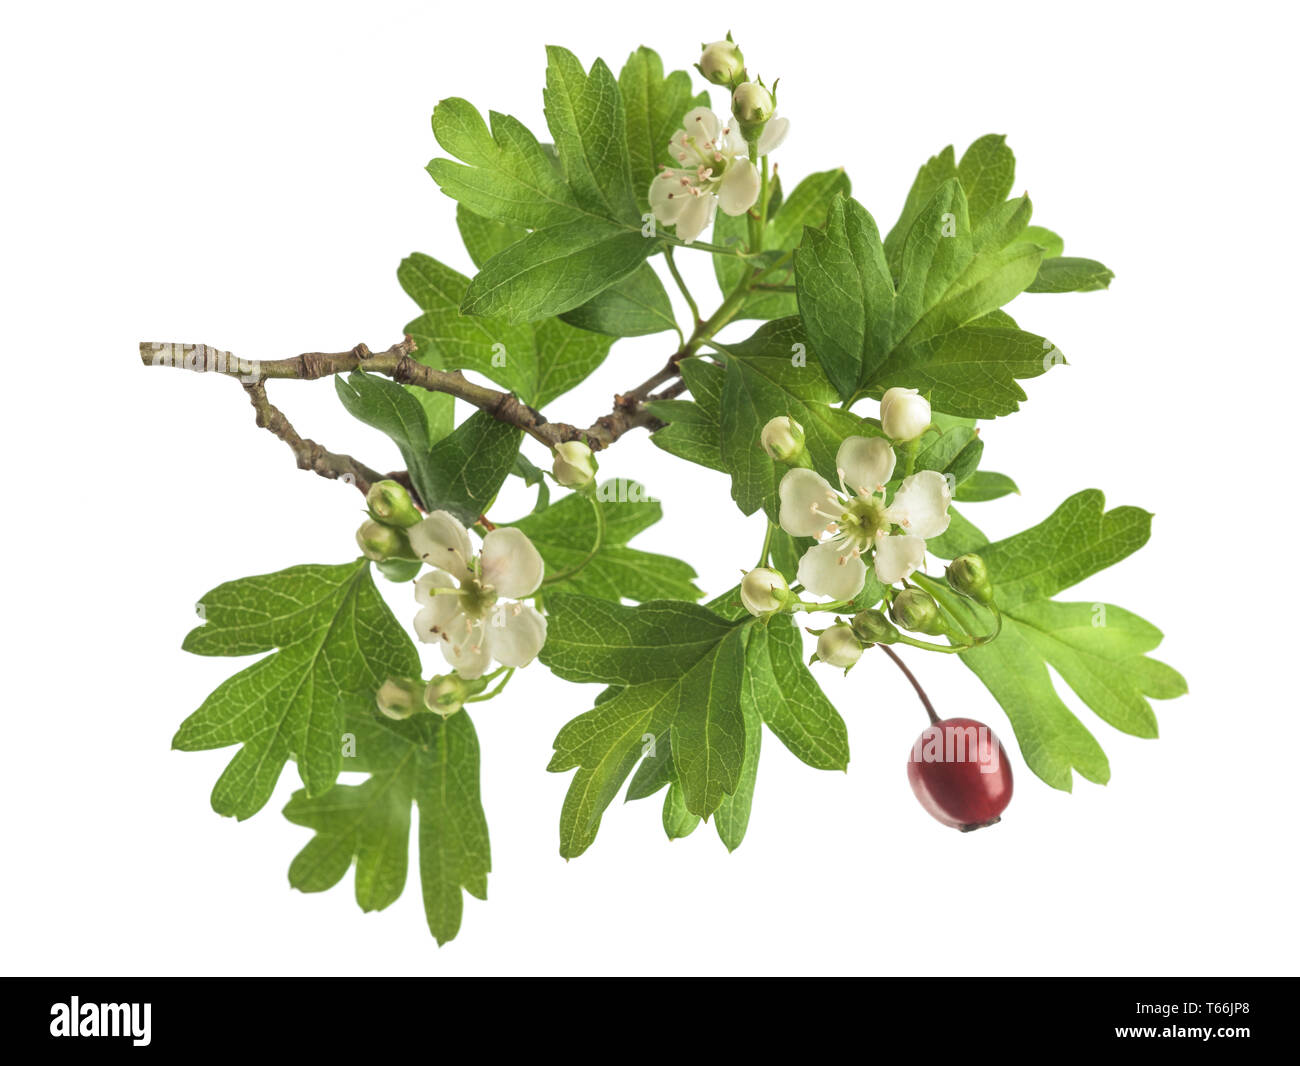 Hawthorn (Crataegus monogyna) branch with flowers isolated on a white background Stock Photo